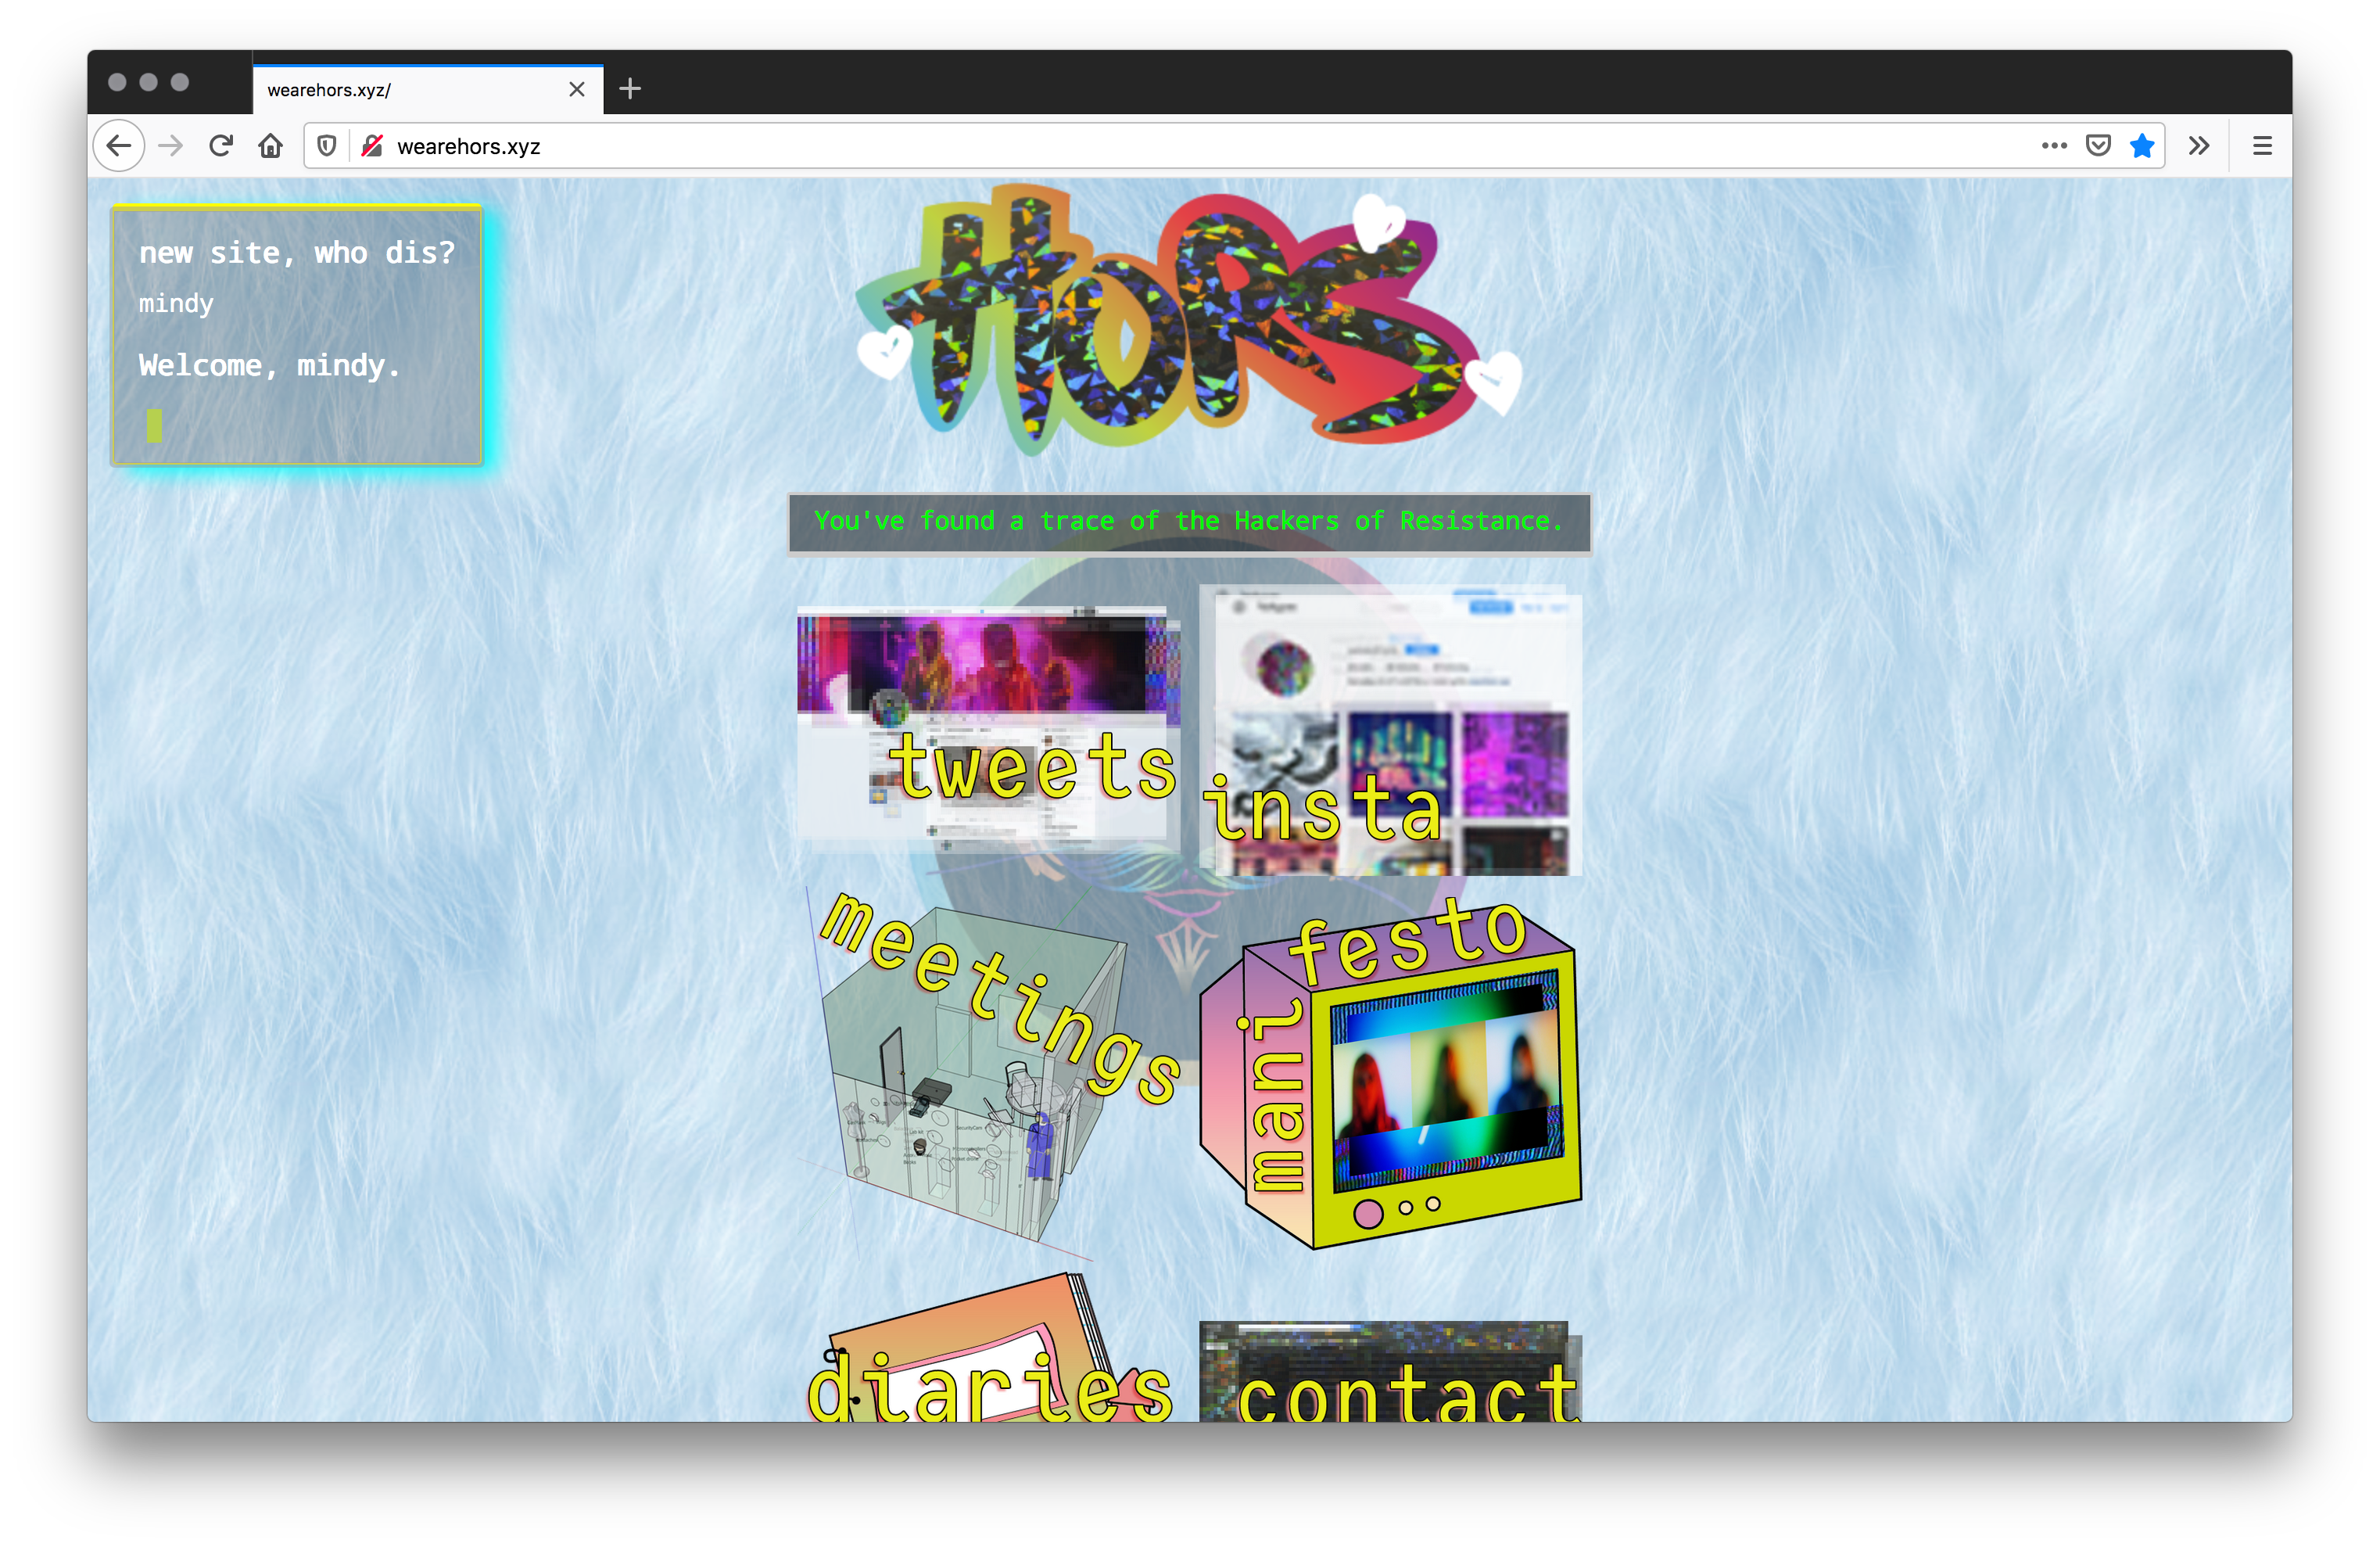 Screenshot of HORS website with a blue textured background and a centered column of 90s-style stickers and images of computer ephemera in bright colors